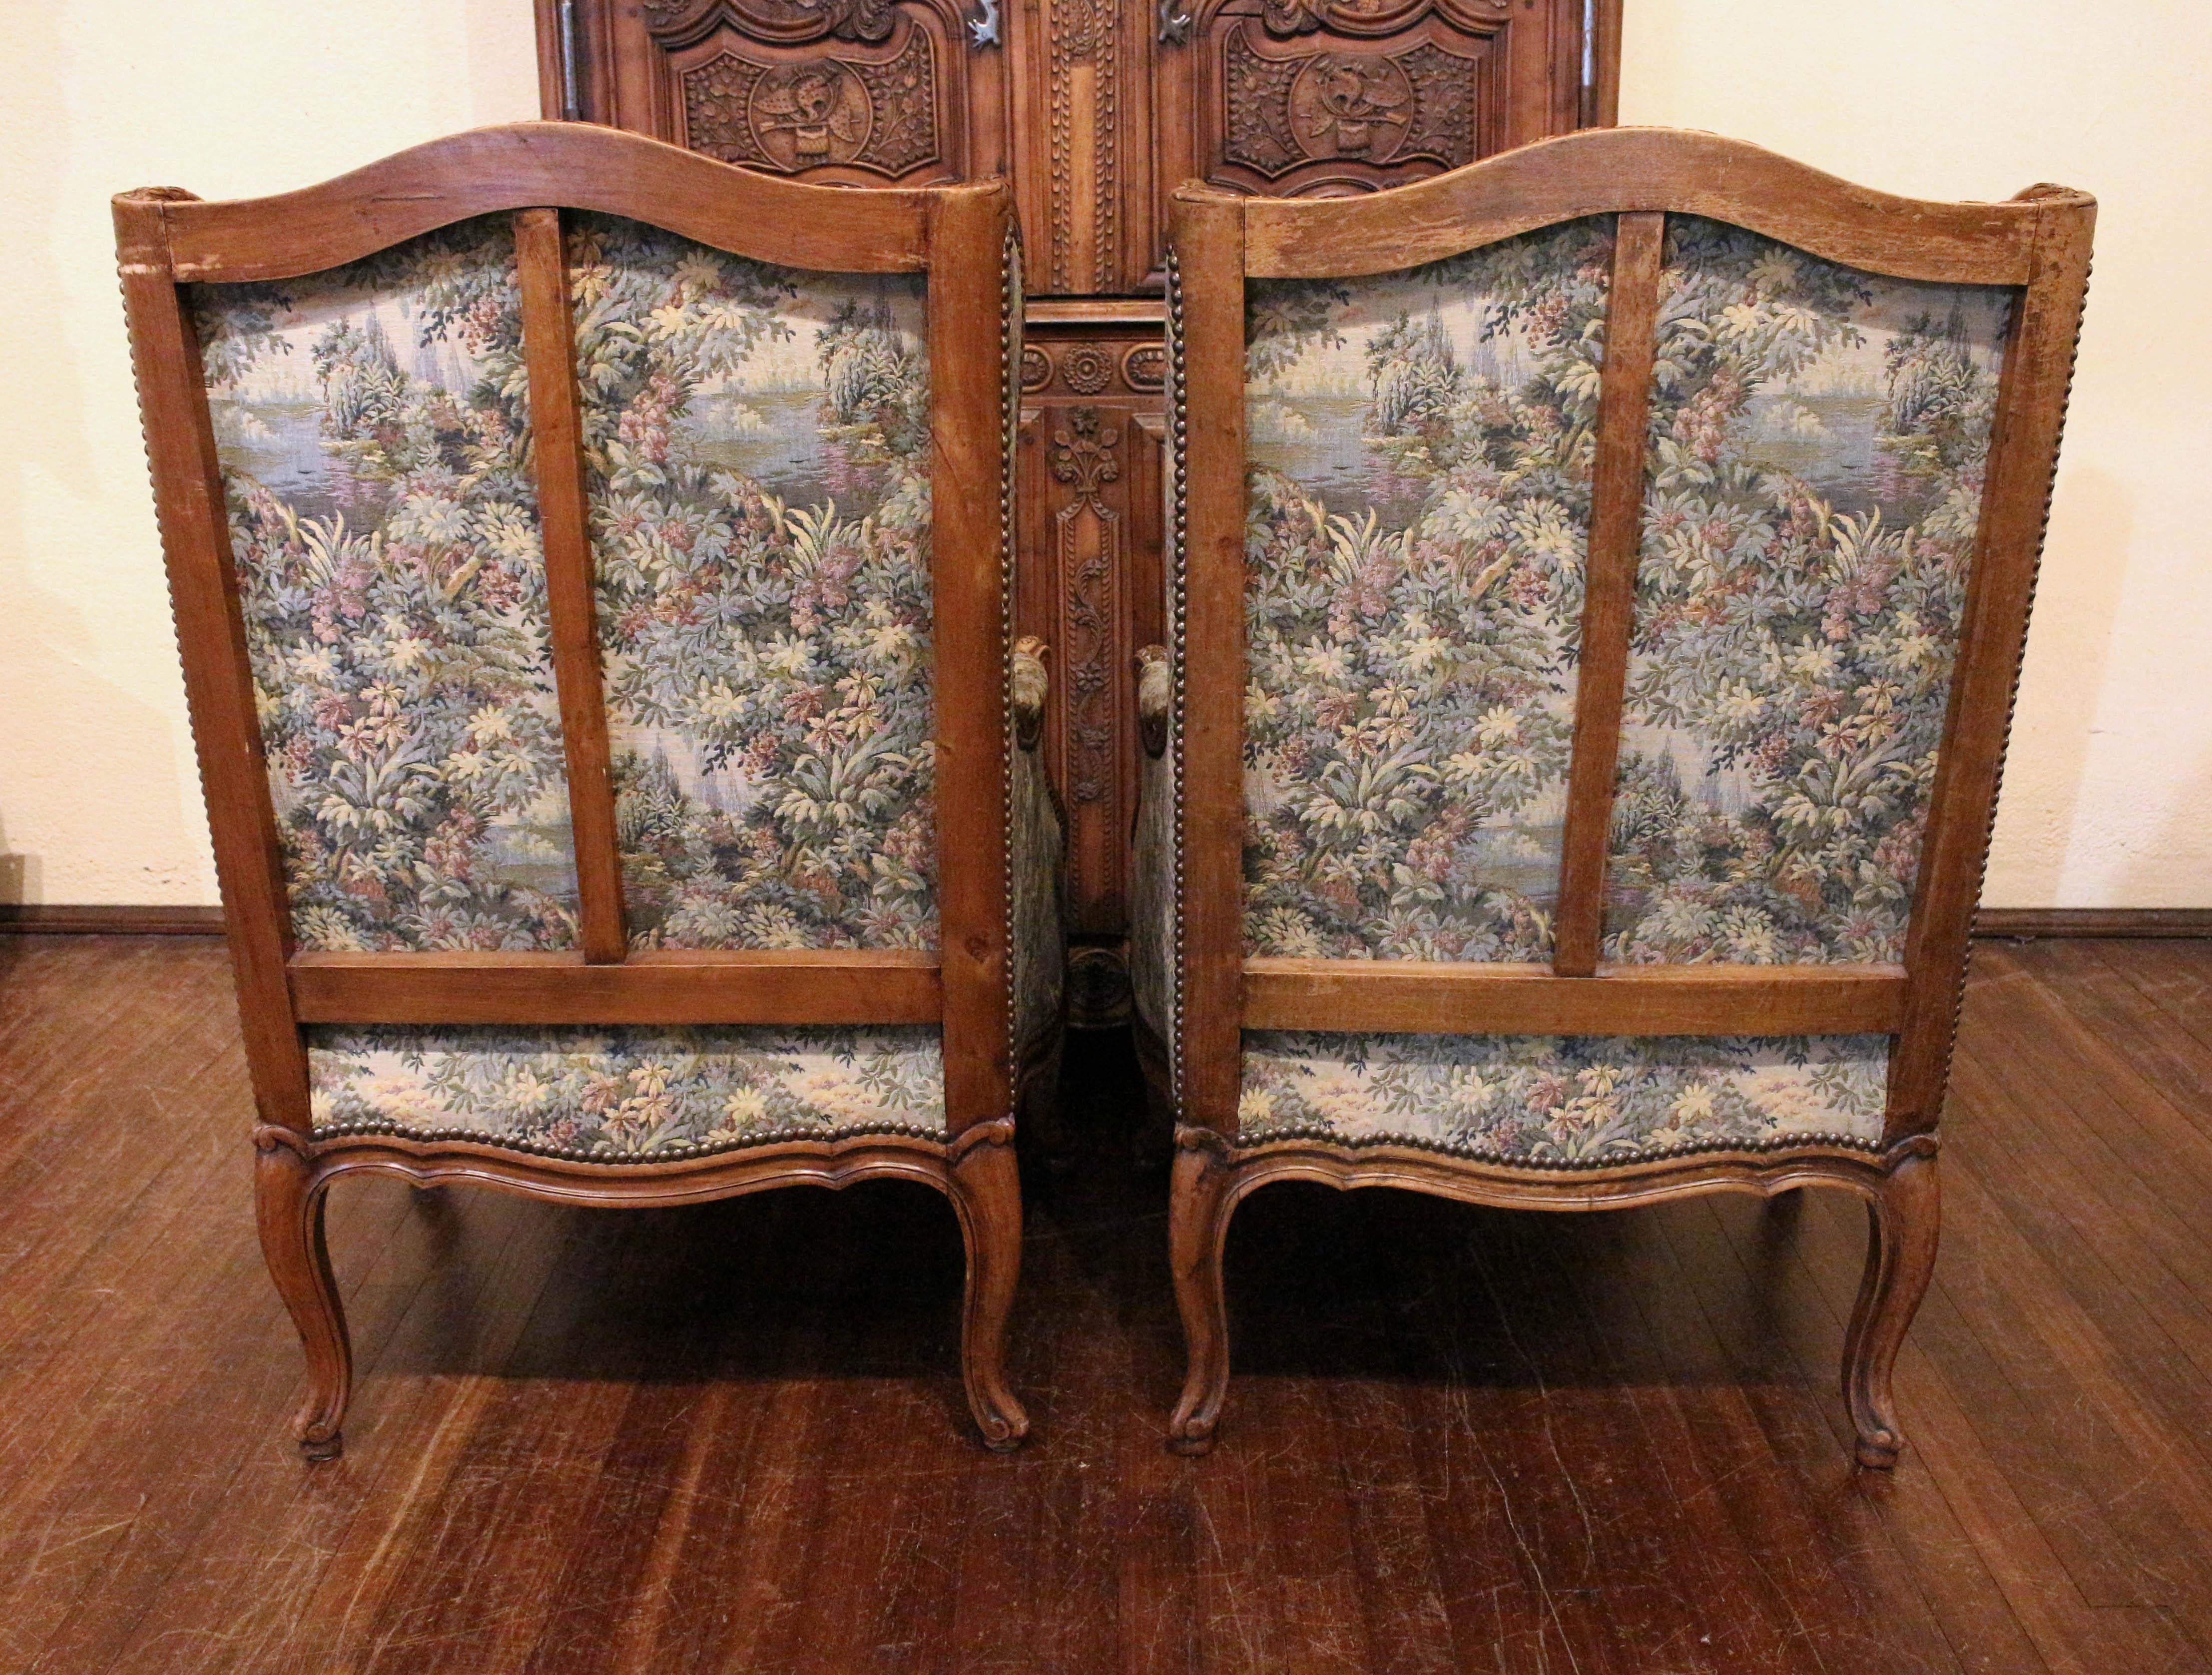 2nd quarter 20th century pair of Louis XV style Bergeres, French. Graceful & comfortable. Well carved walnut, fully developed on all sides. Shell, acanthus, rosette & bell flower carving. Cabriole legs ending in modified whorl feet. In French floral